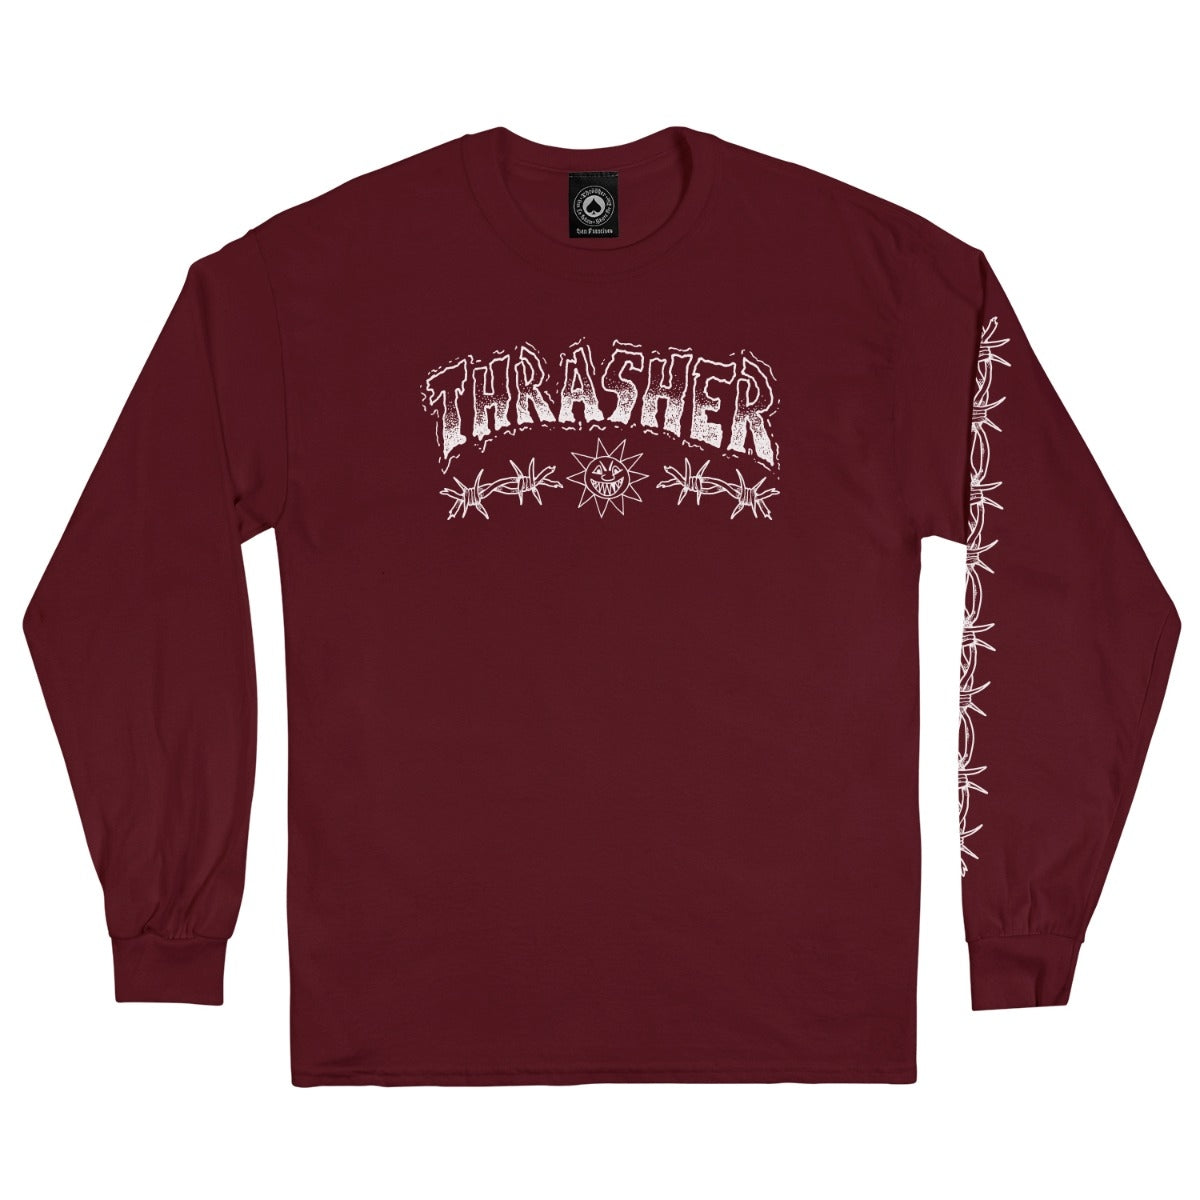 Barbed Wire L/S Tee Shirt Mar(size options listed)